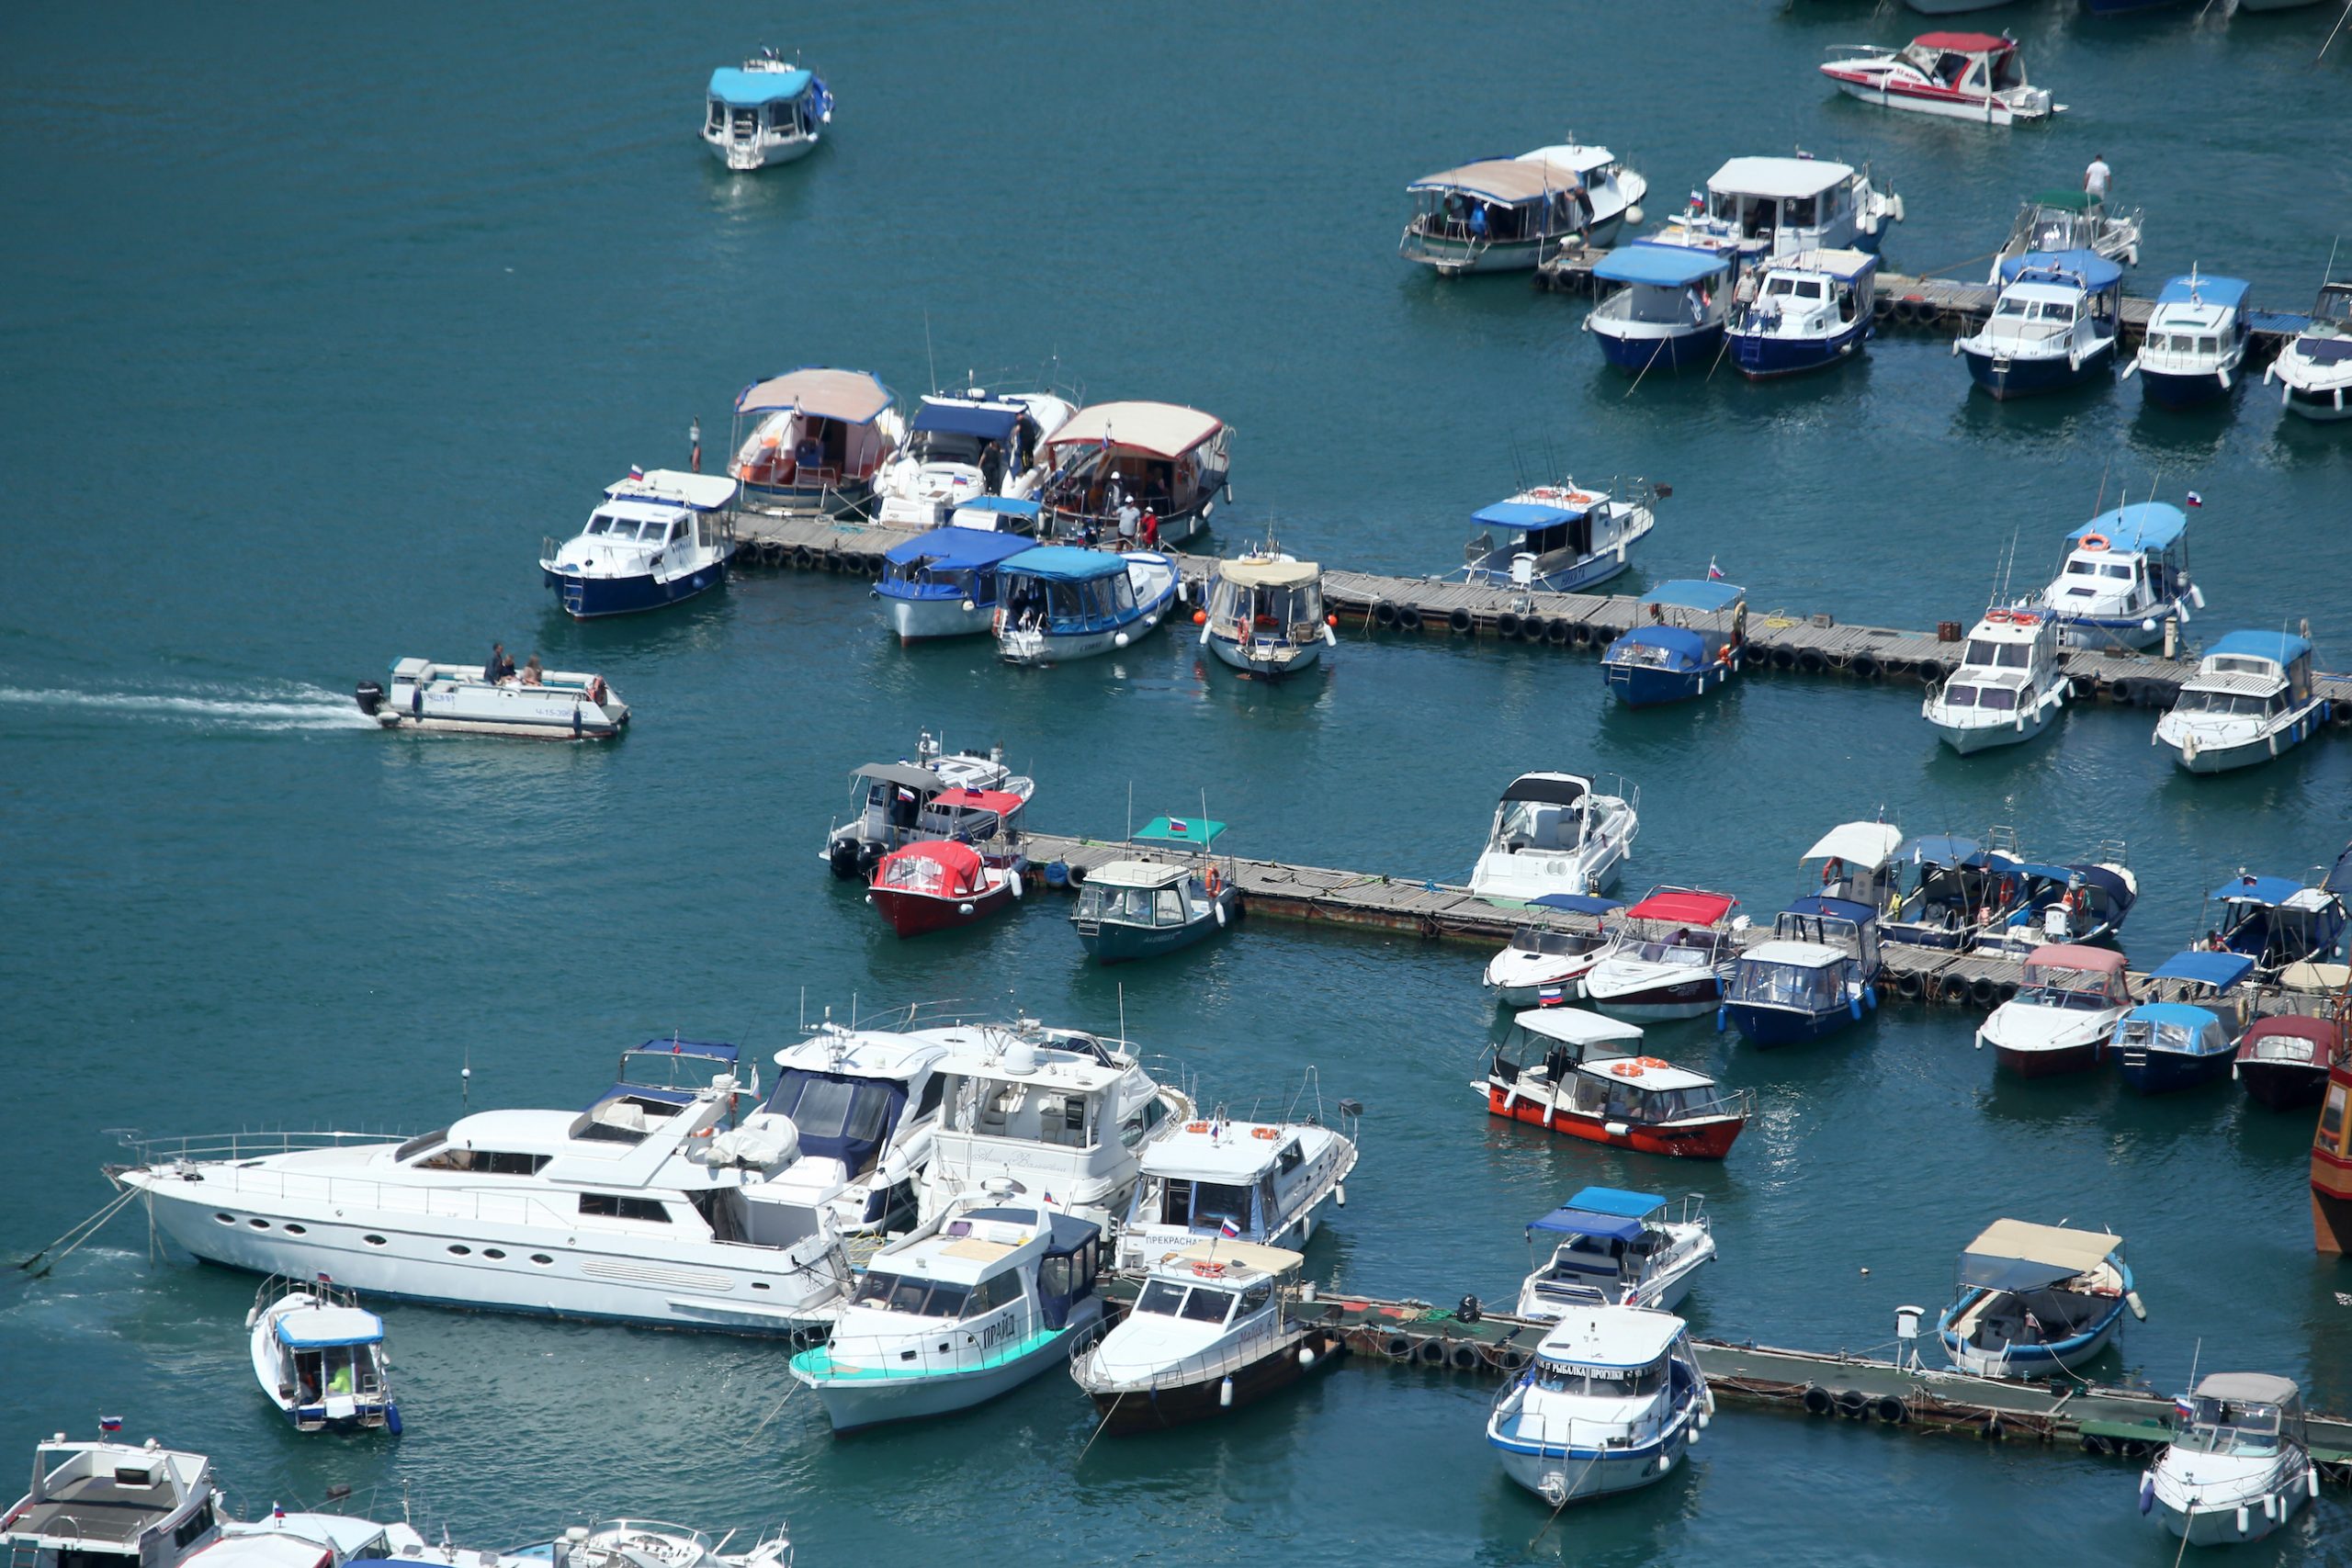 Yachts and boats are pictured on the water at the docks in the town of Balaklava